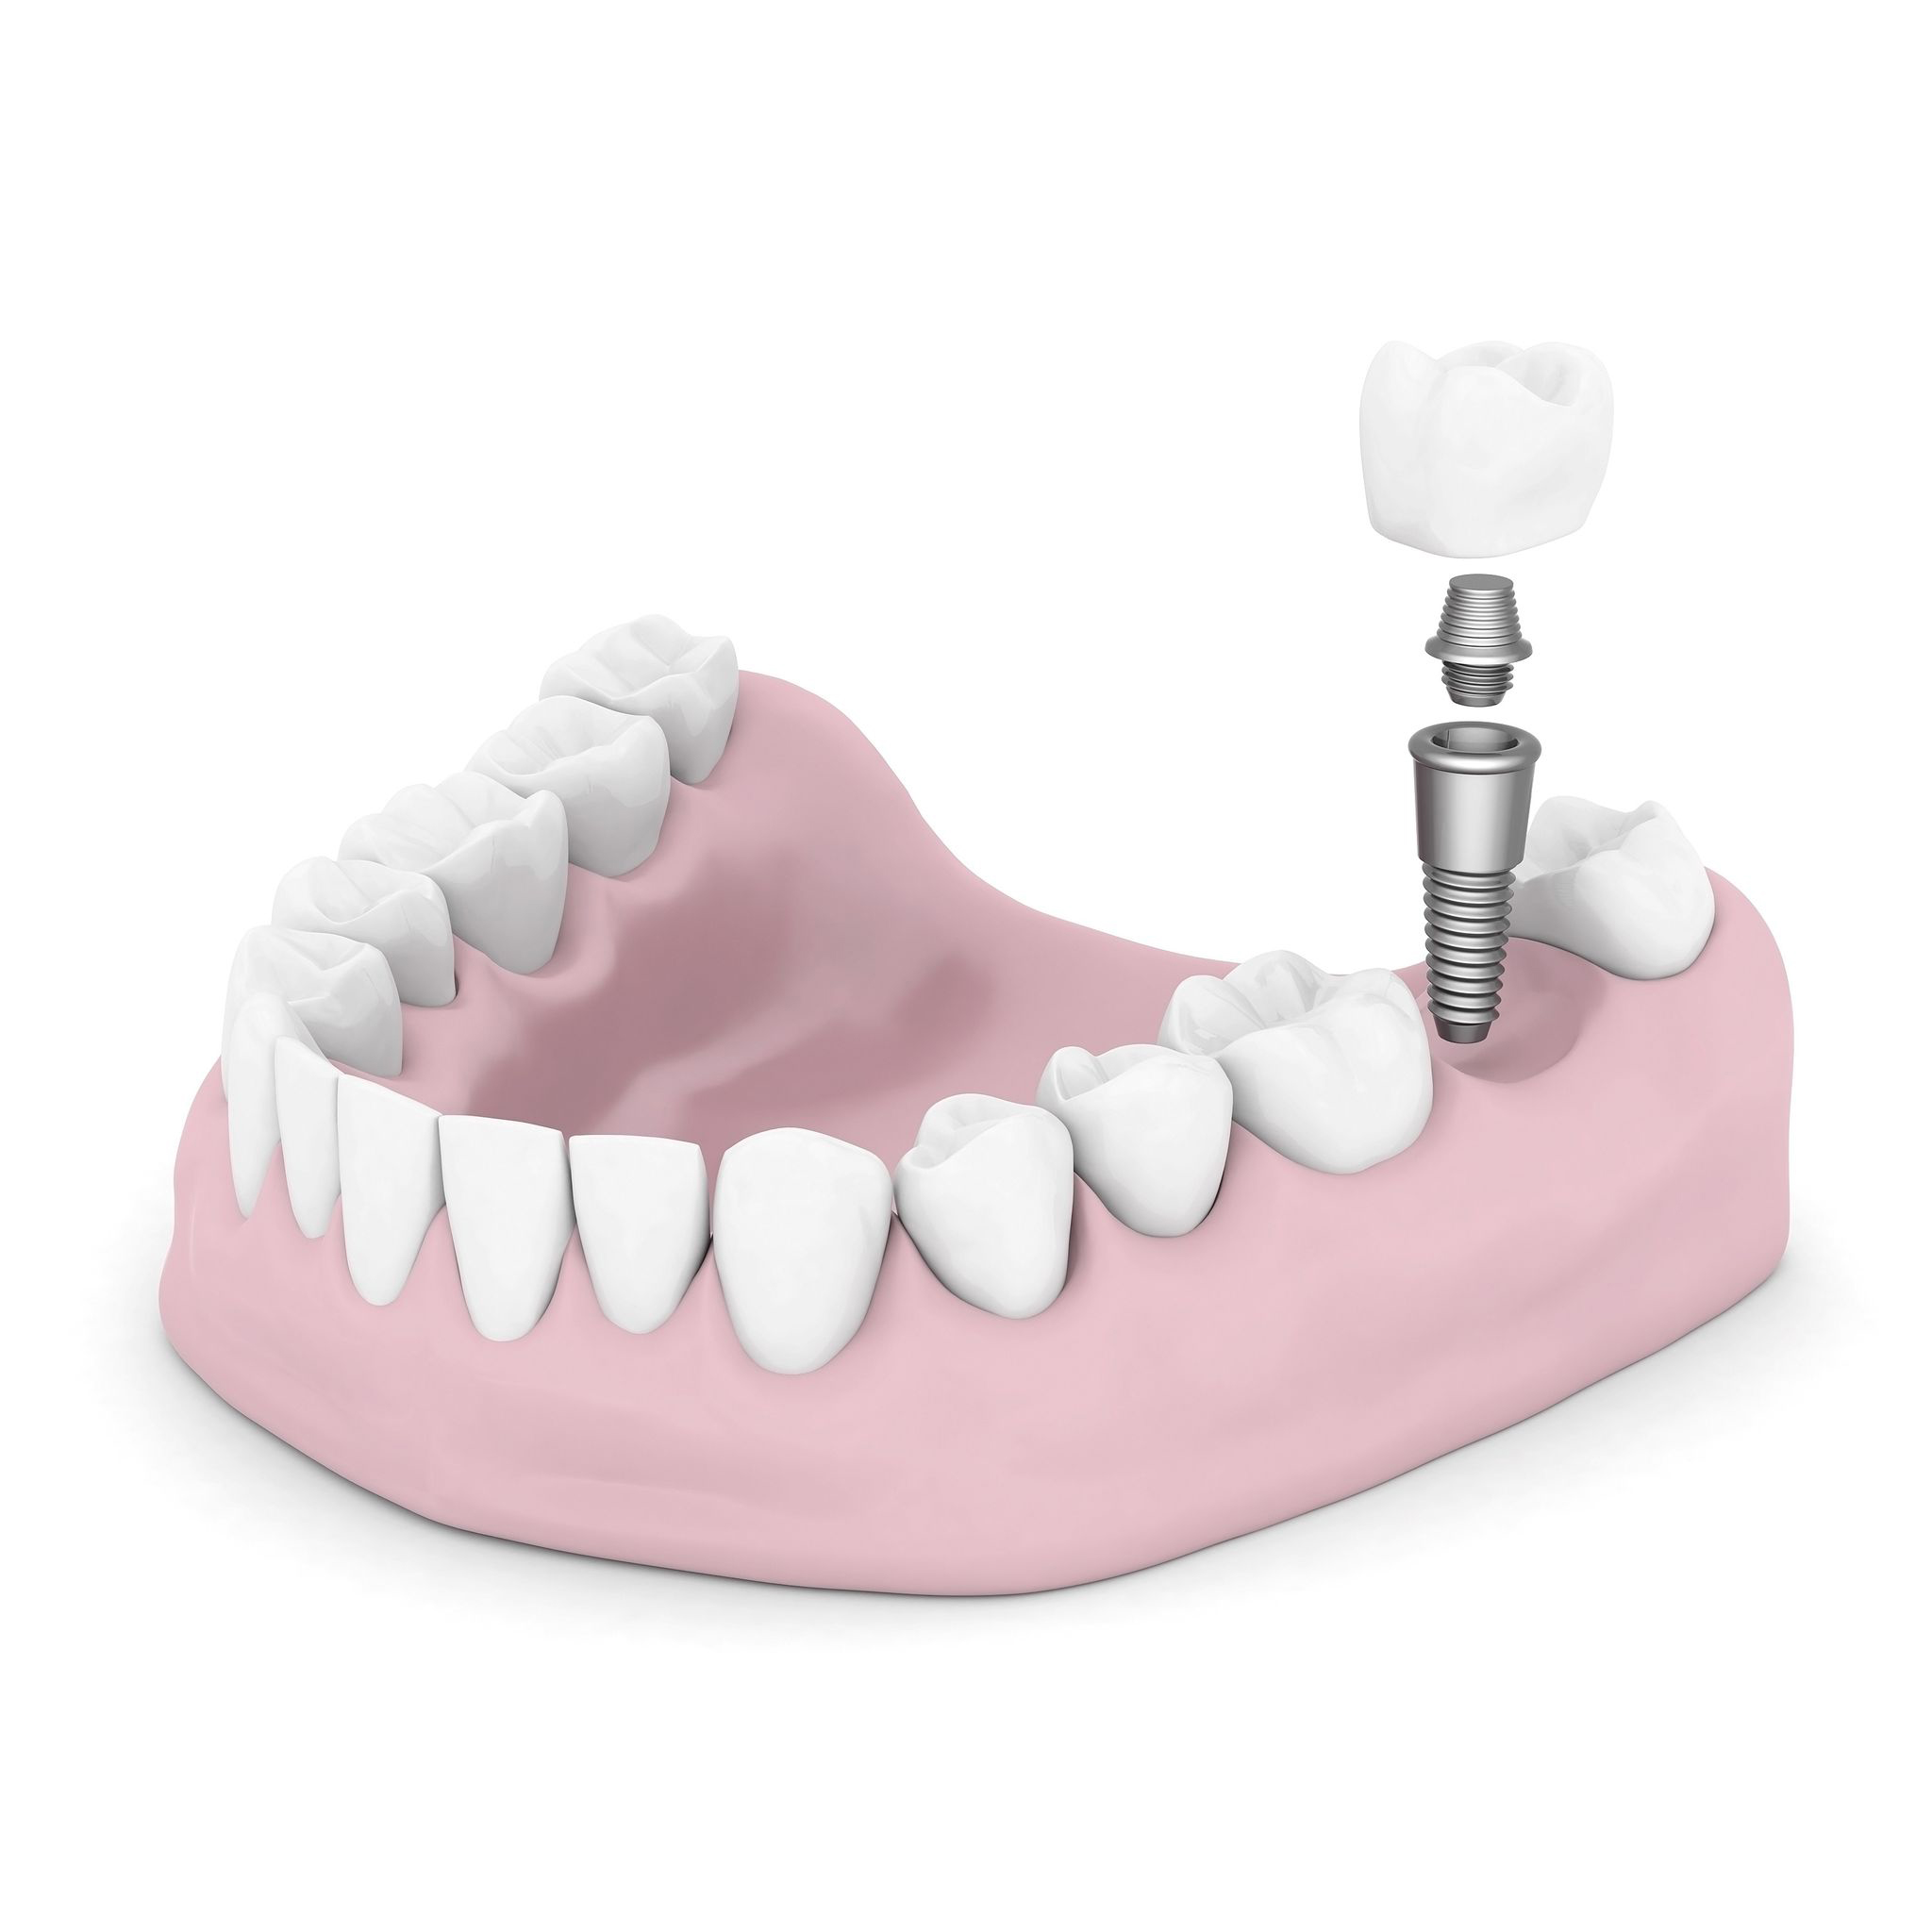 Where can I get Dental Implants in Glendale?